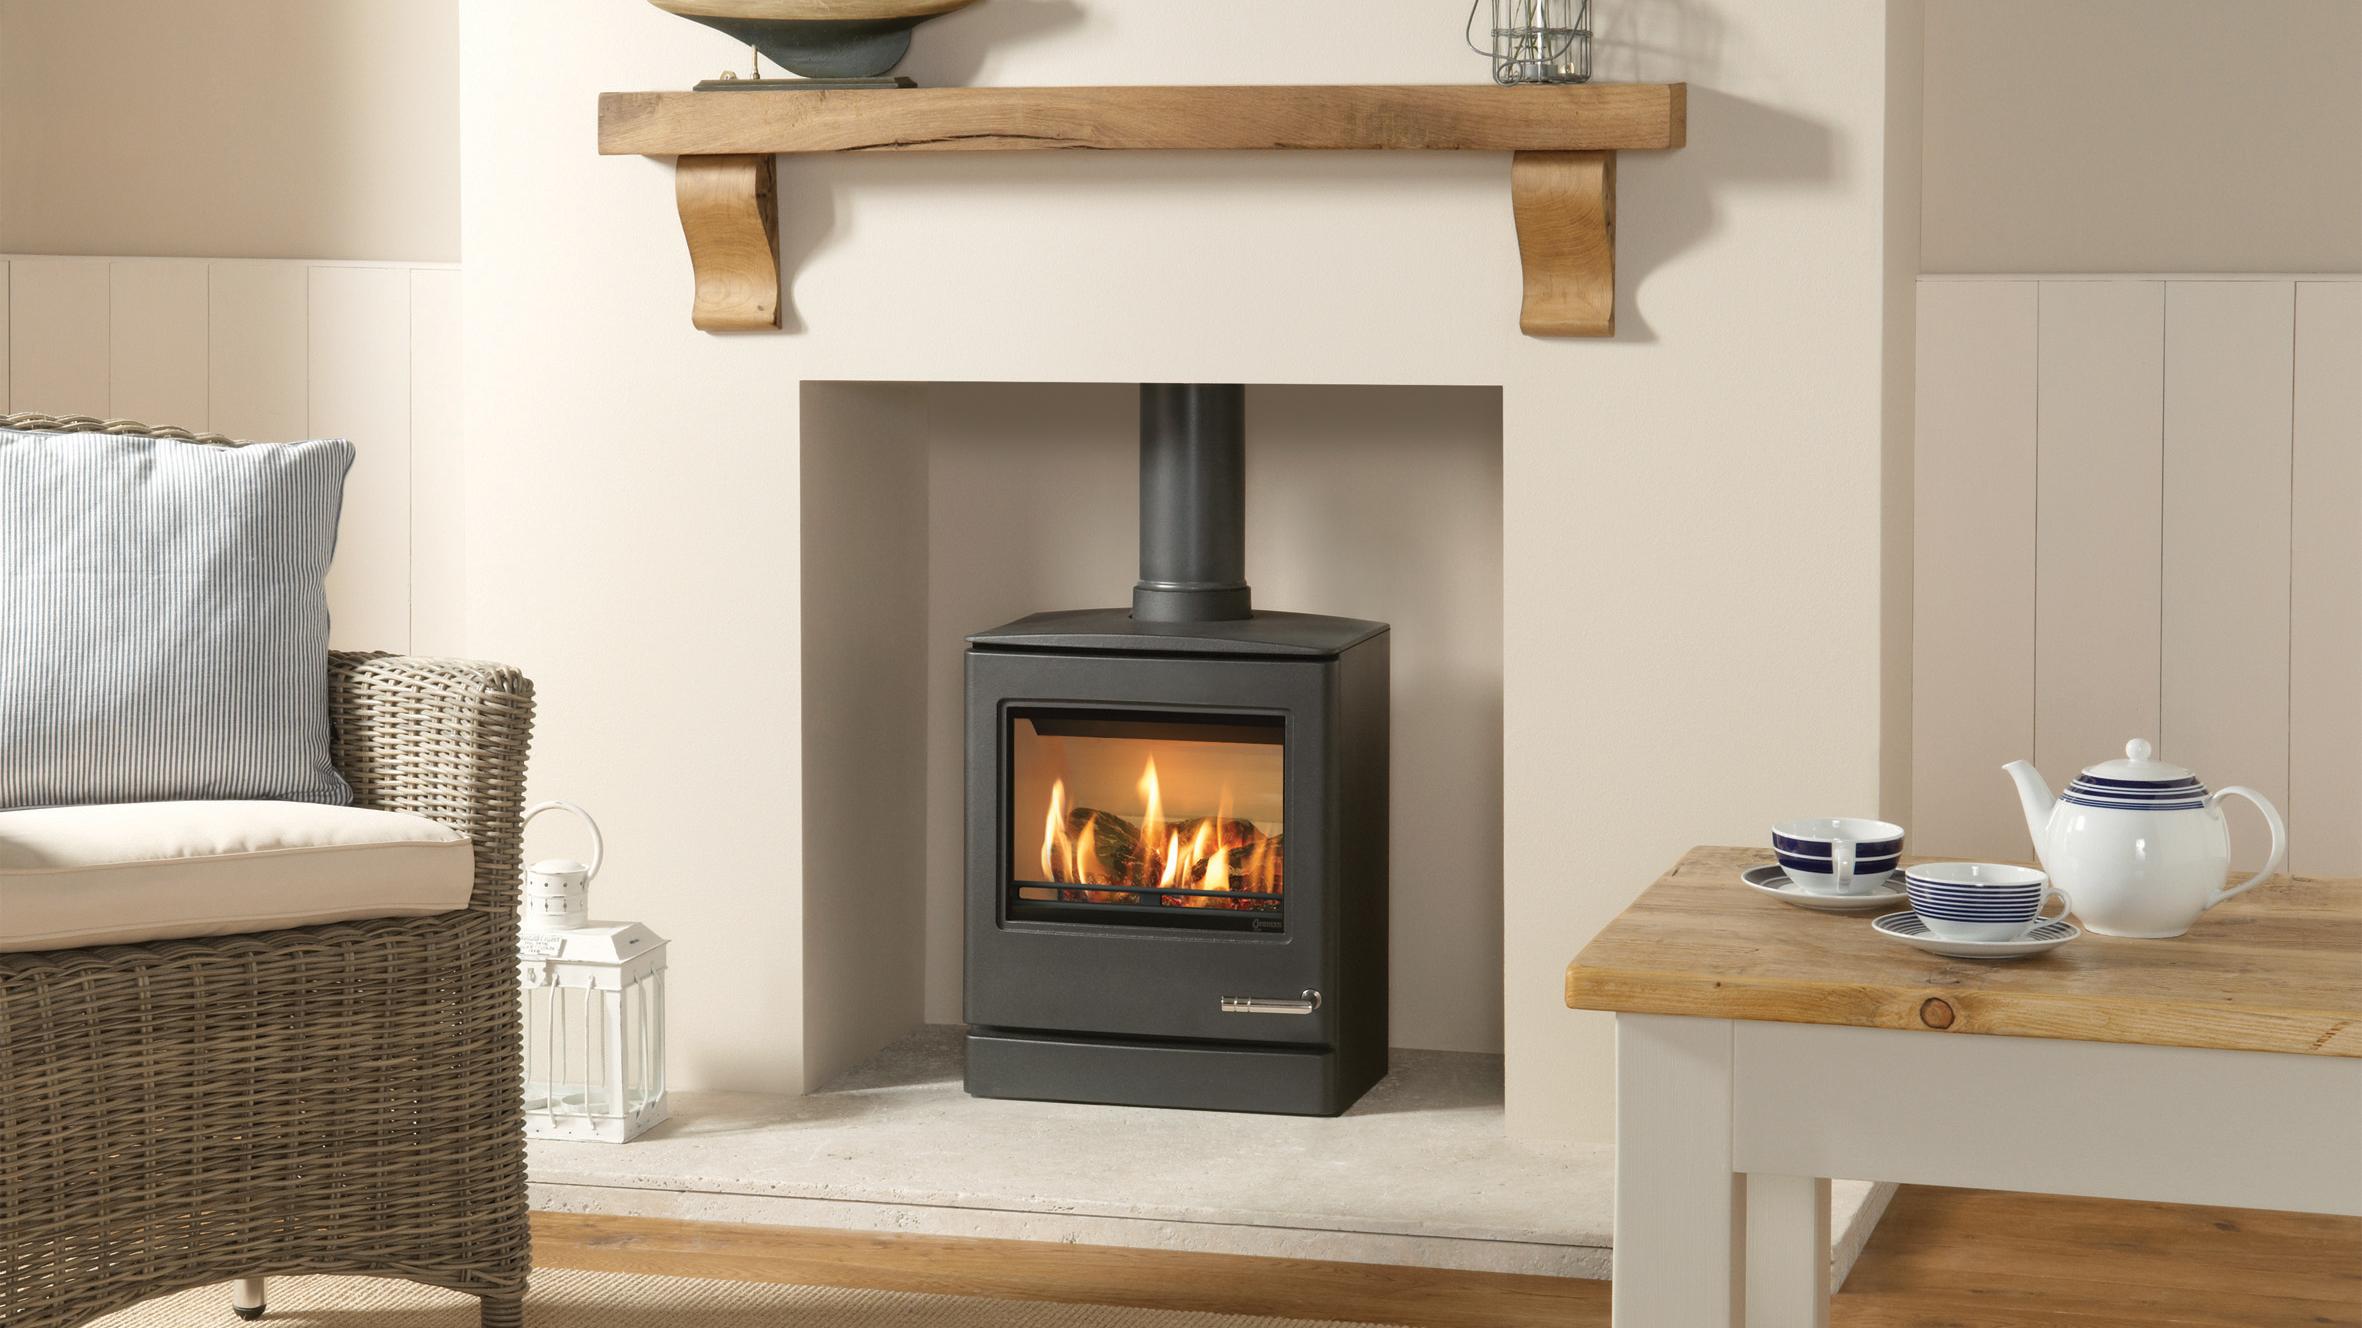 CL Gas Stoves